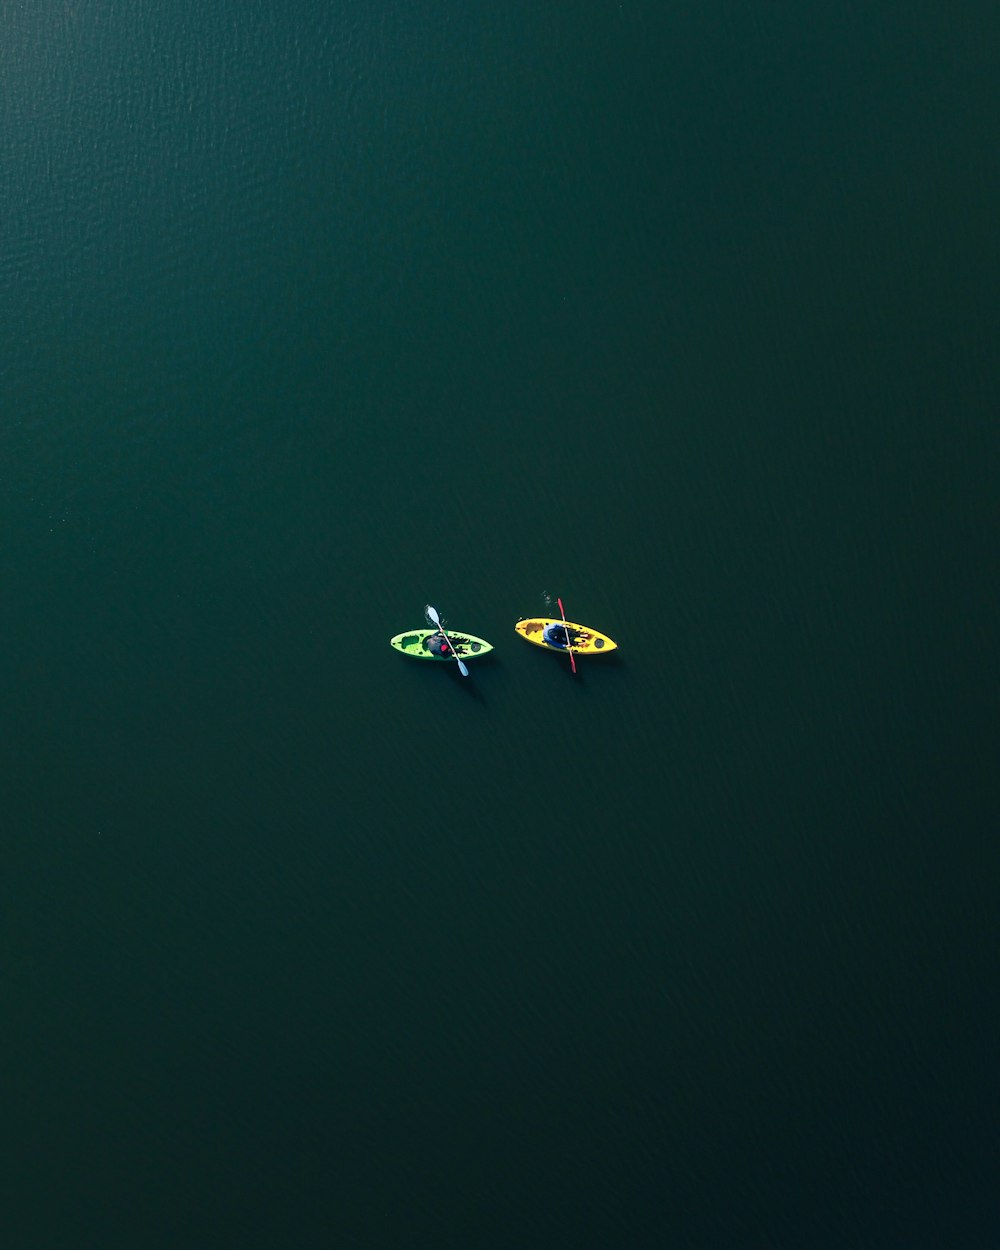 two people riding on two kayaks